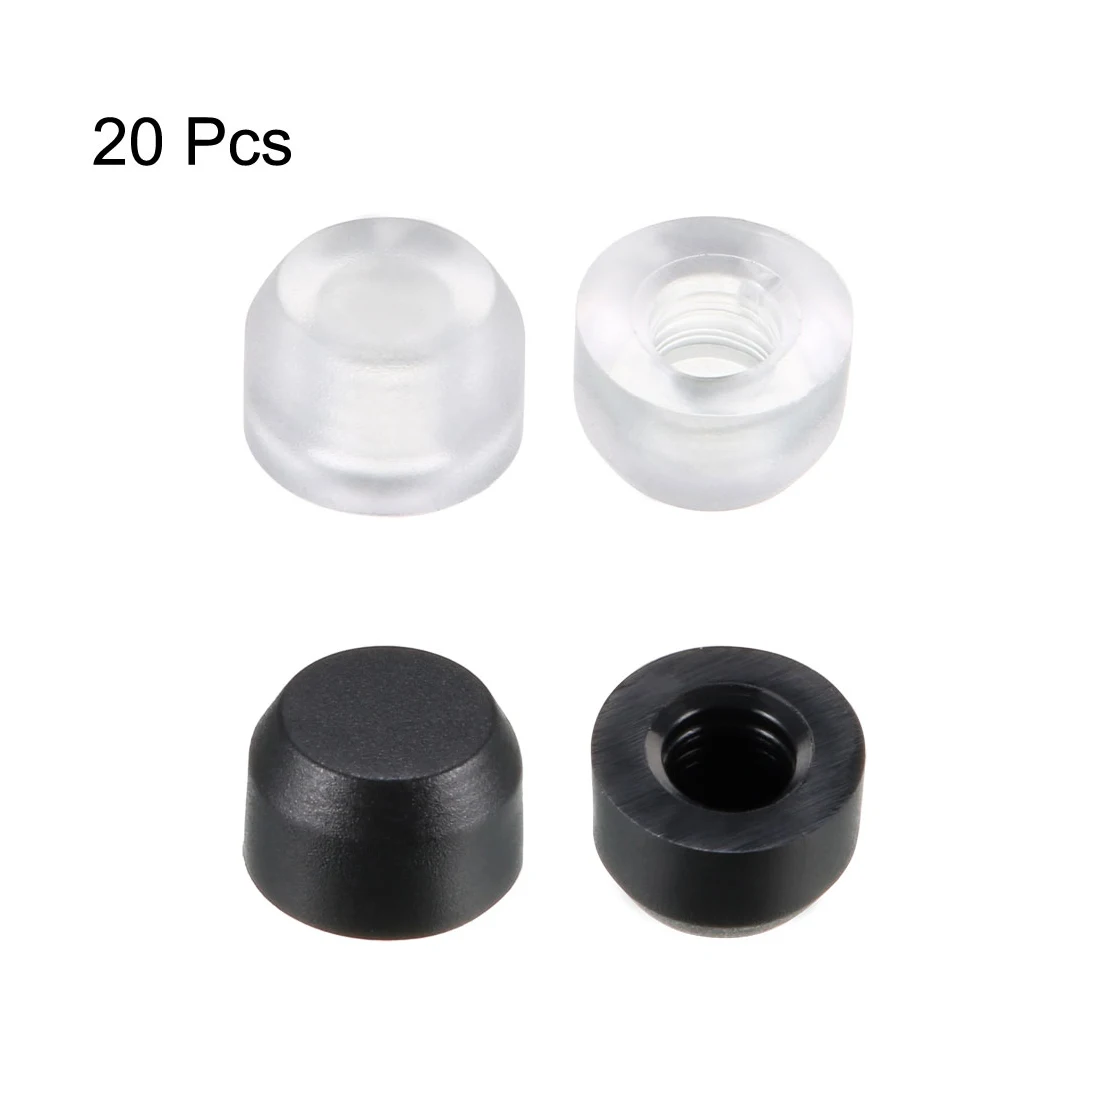 

20pcs 6*4mm Transparent/Black Round Button Cap 3mm Hole Dia Silica-gel Pushbutton Tactile Switch Cap for 6*6mm Tactile Switches